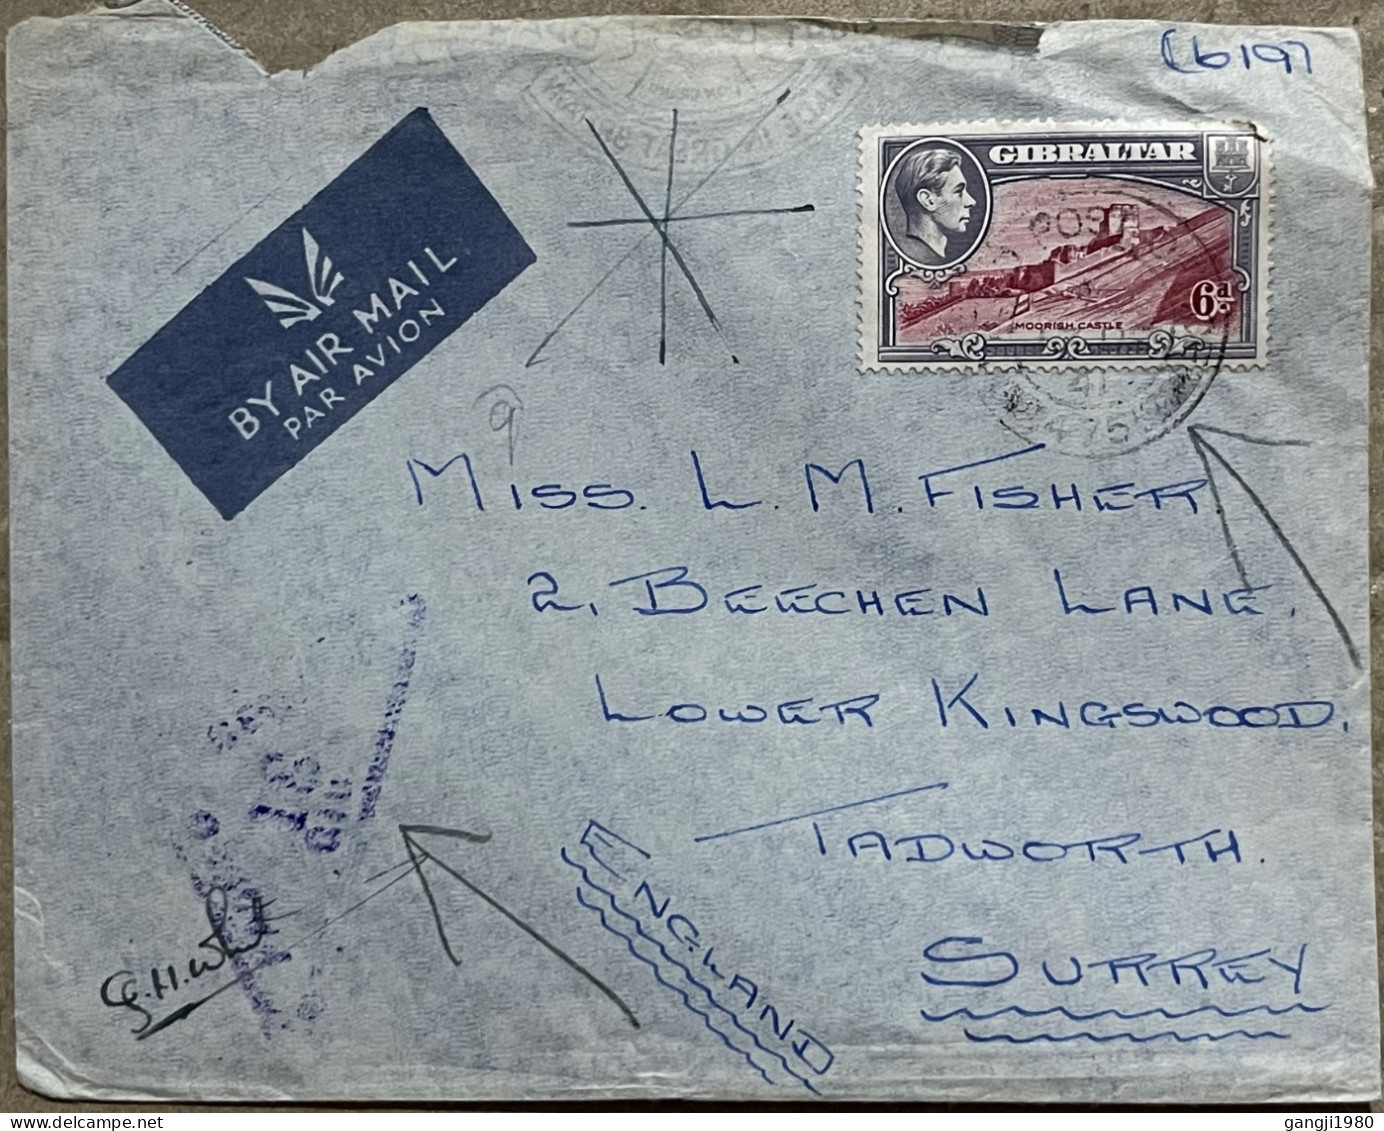 GIBRALTAR 1941, WORLD WAR-2, COVER USED TO ENGLAND, TRIANGLE CENSOR, FPO NO 475, MOORISH CASTLE & KING STAMP - Gibraltar